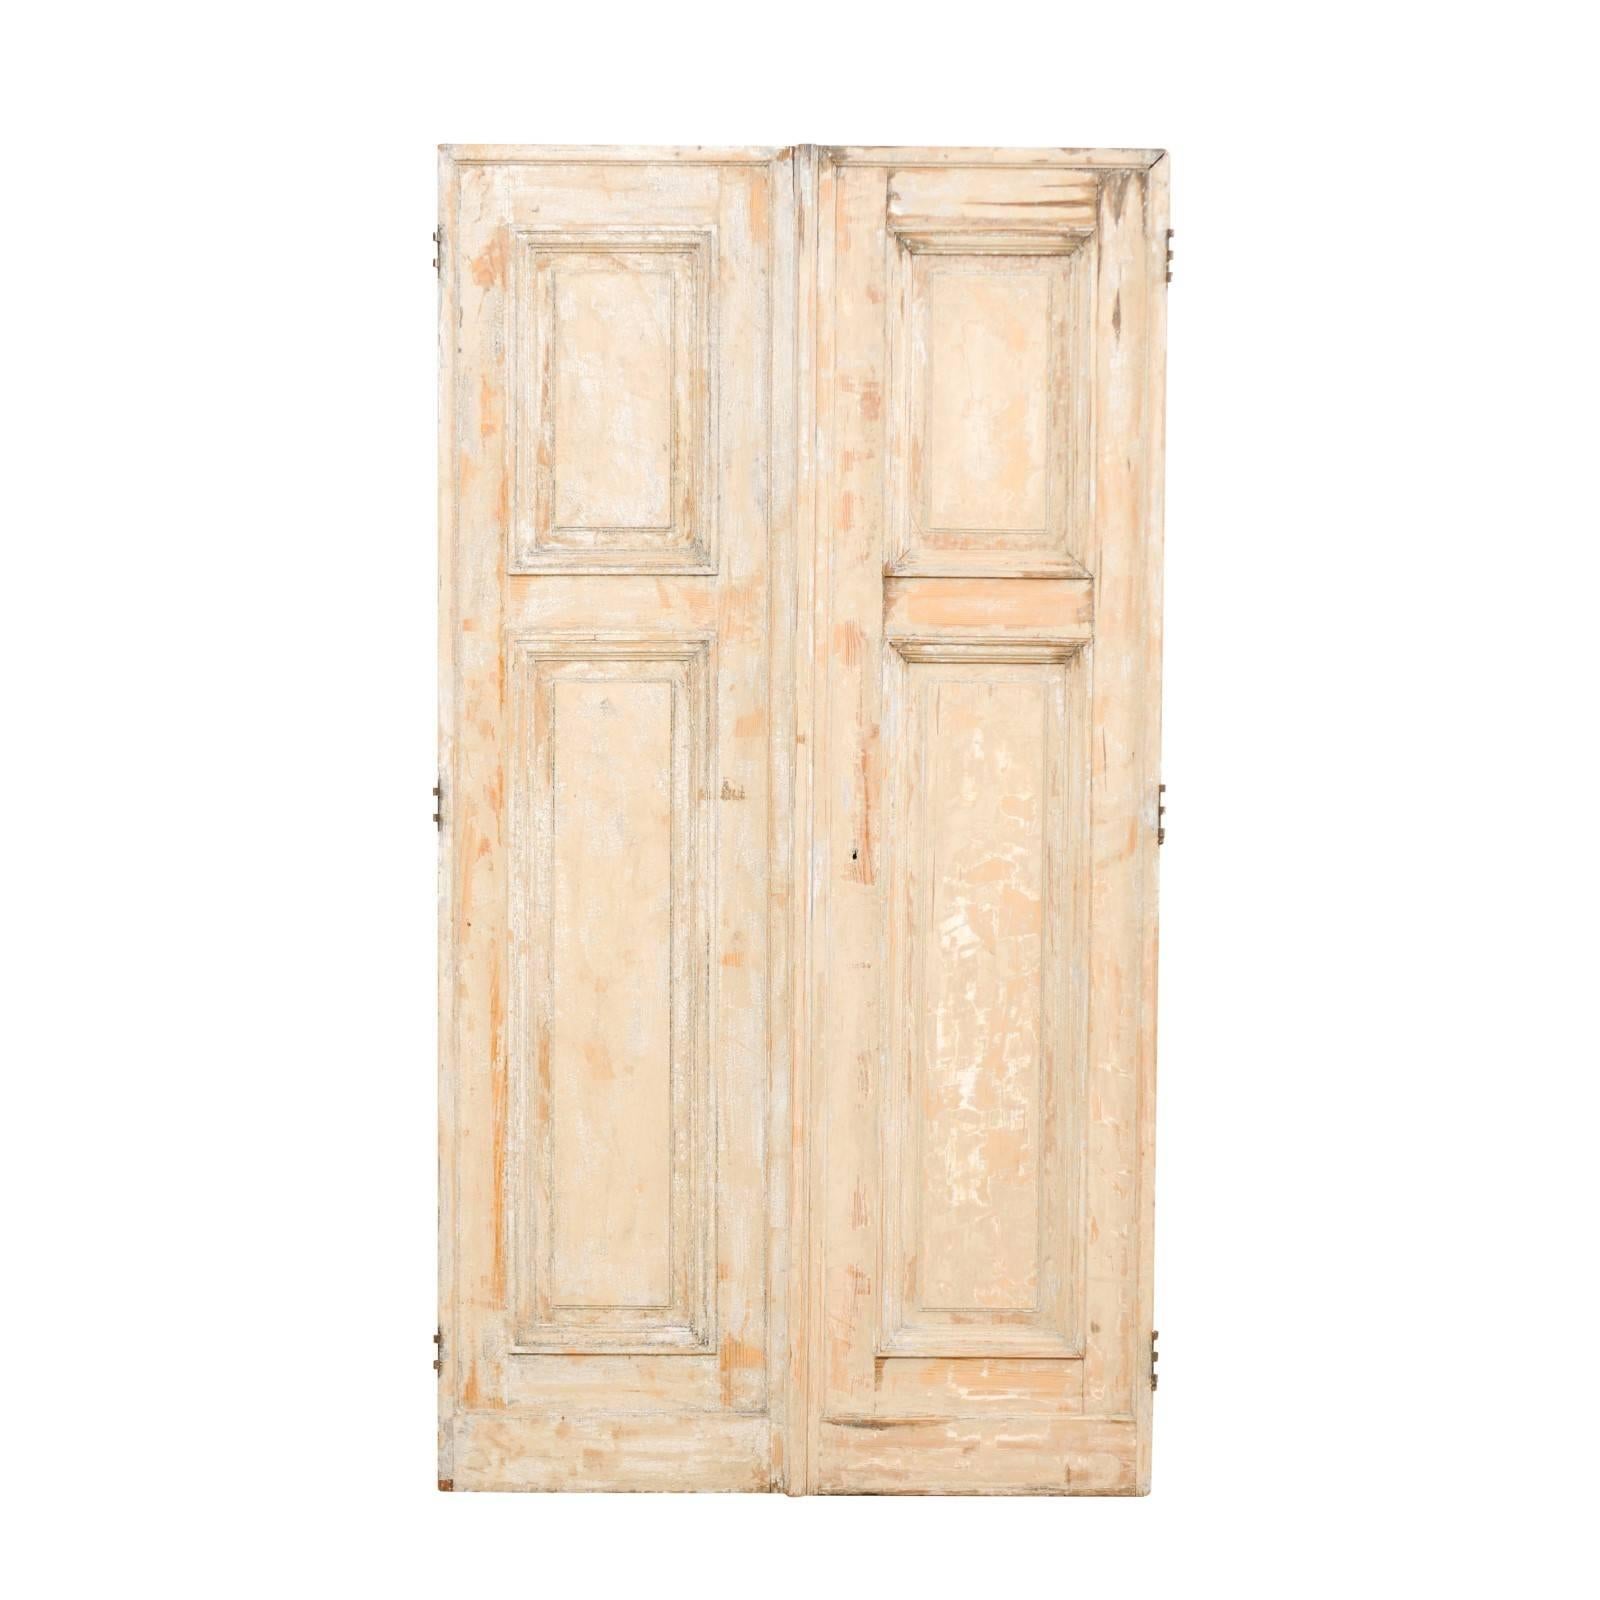 Pair of 19th Century Painted Wood French Doors with Nice Recessed Panels